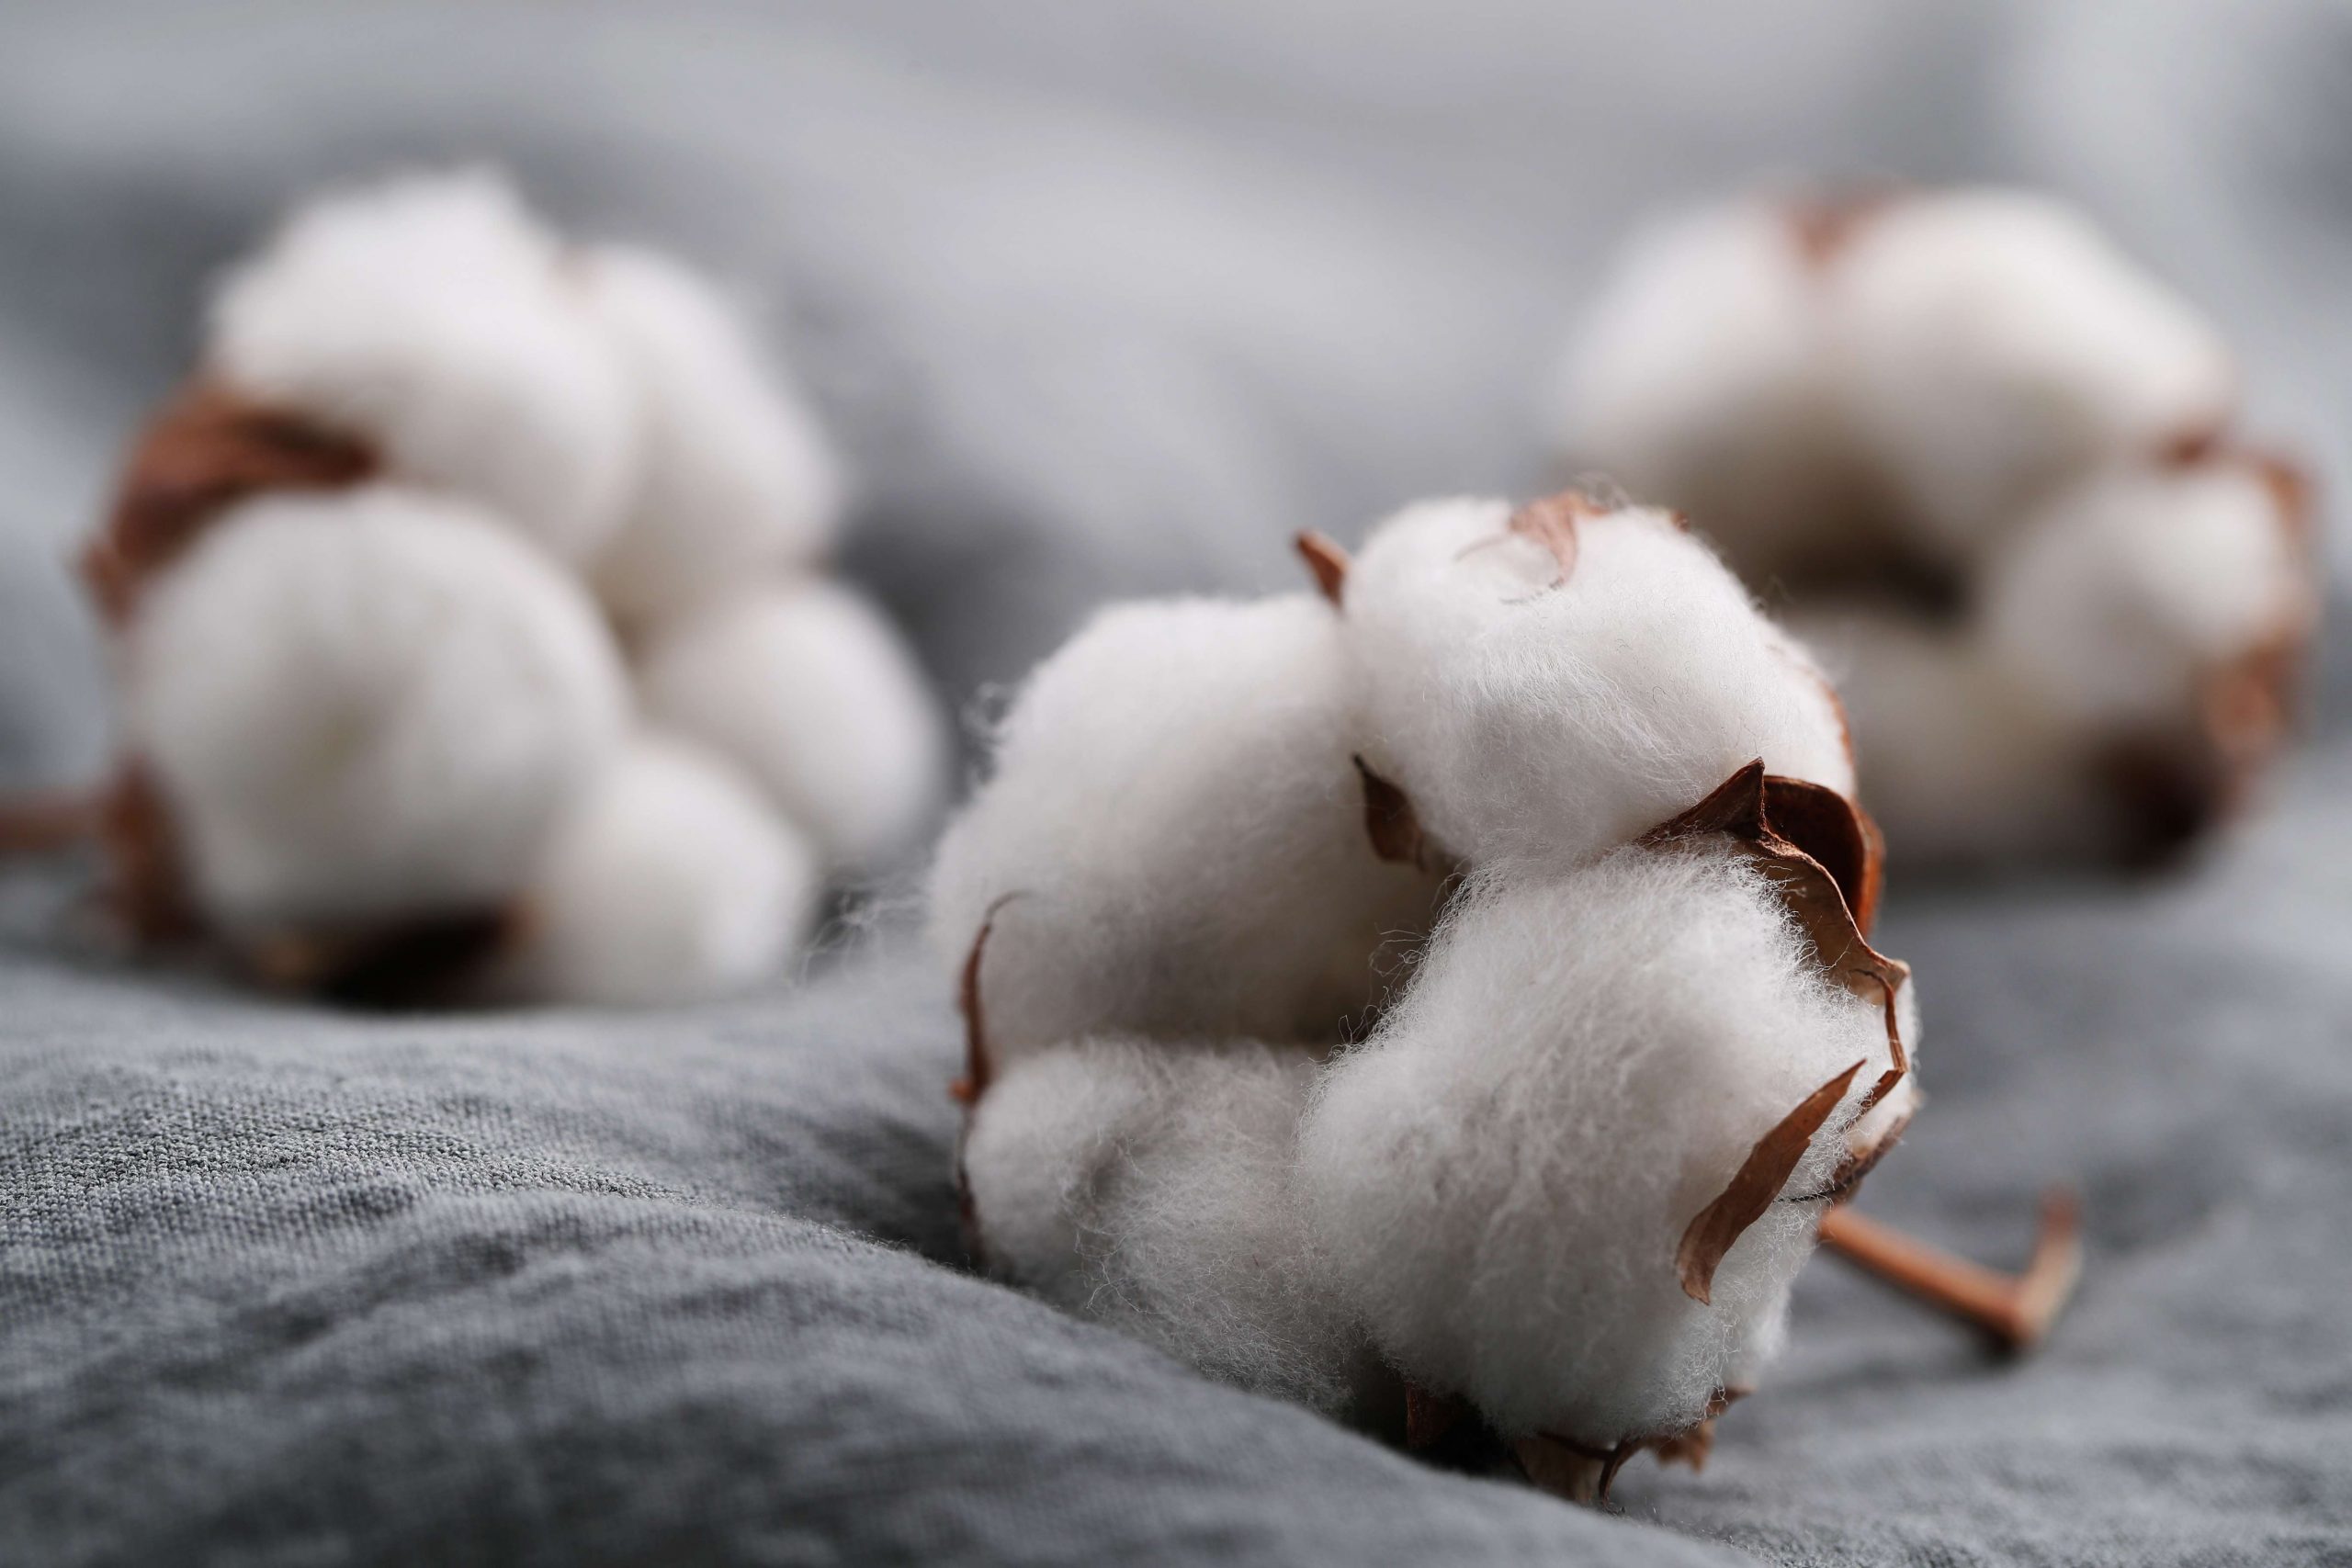 Government urges private sector to boost cotton productivity